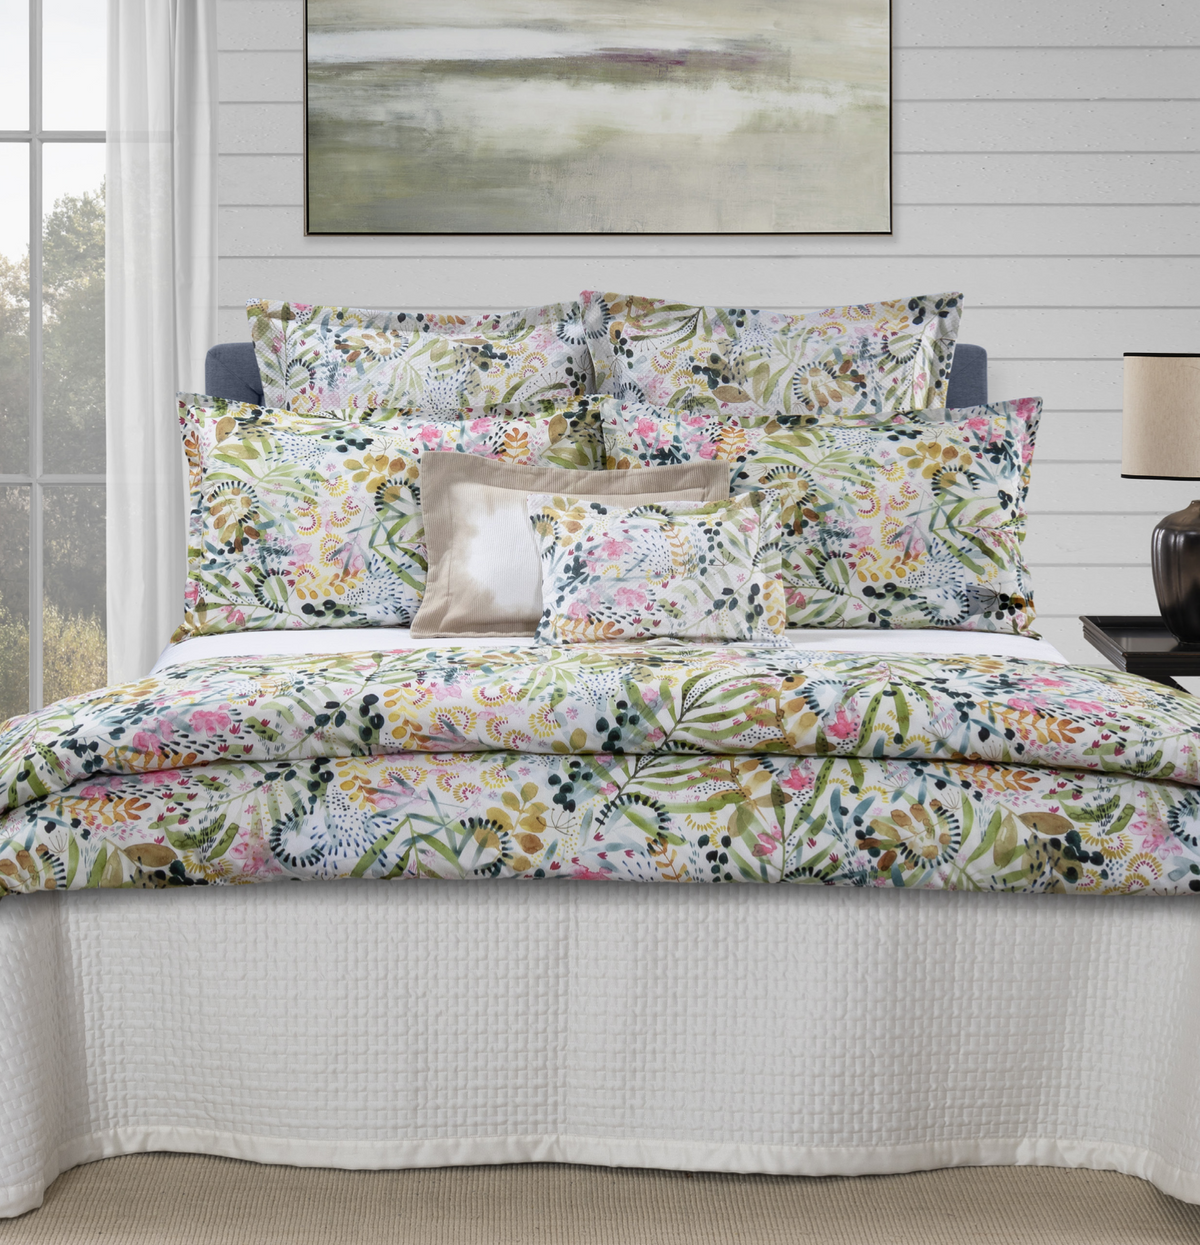 Selvaggia Printed Bedding by Dea Linens | Luxury Bedding